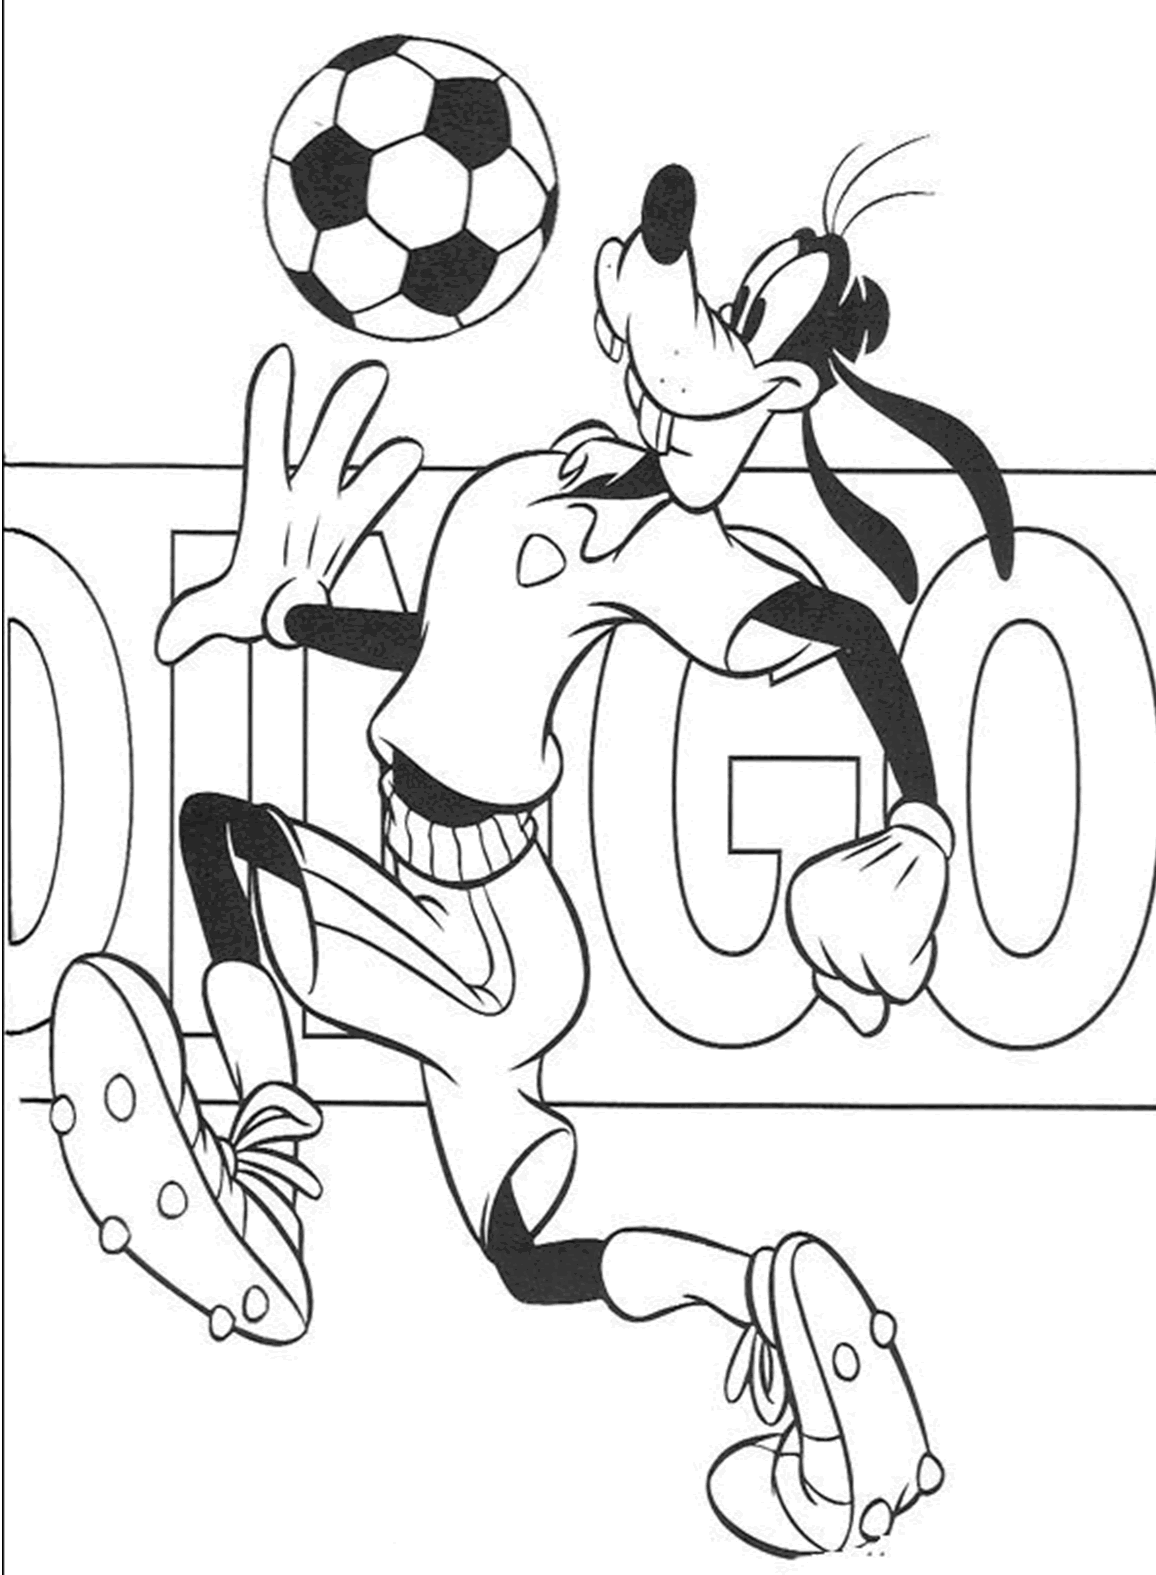 Goofy Printable Coloring Pages - Printable World Holiday